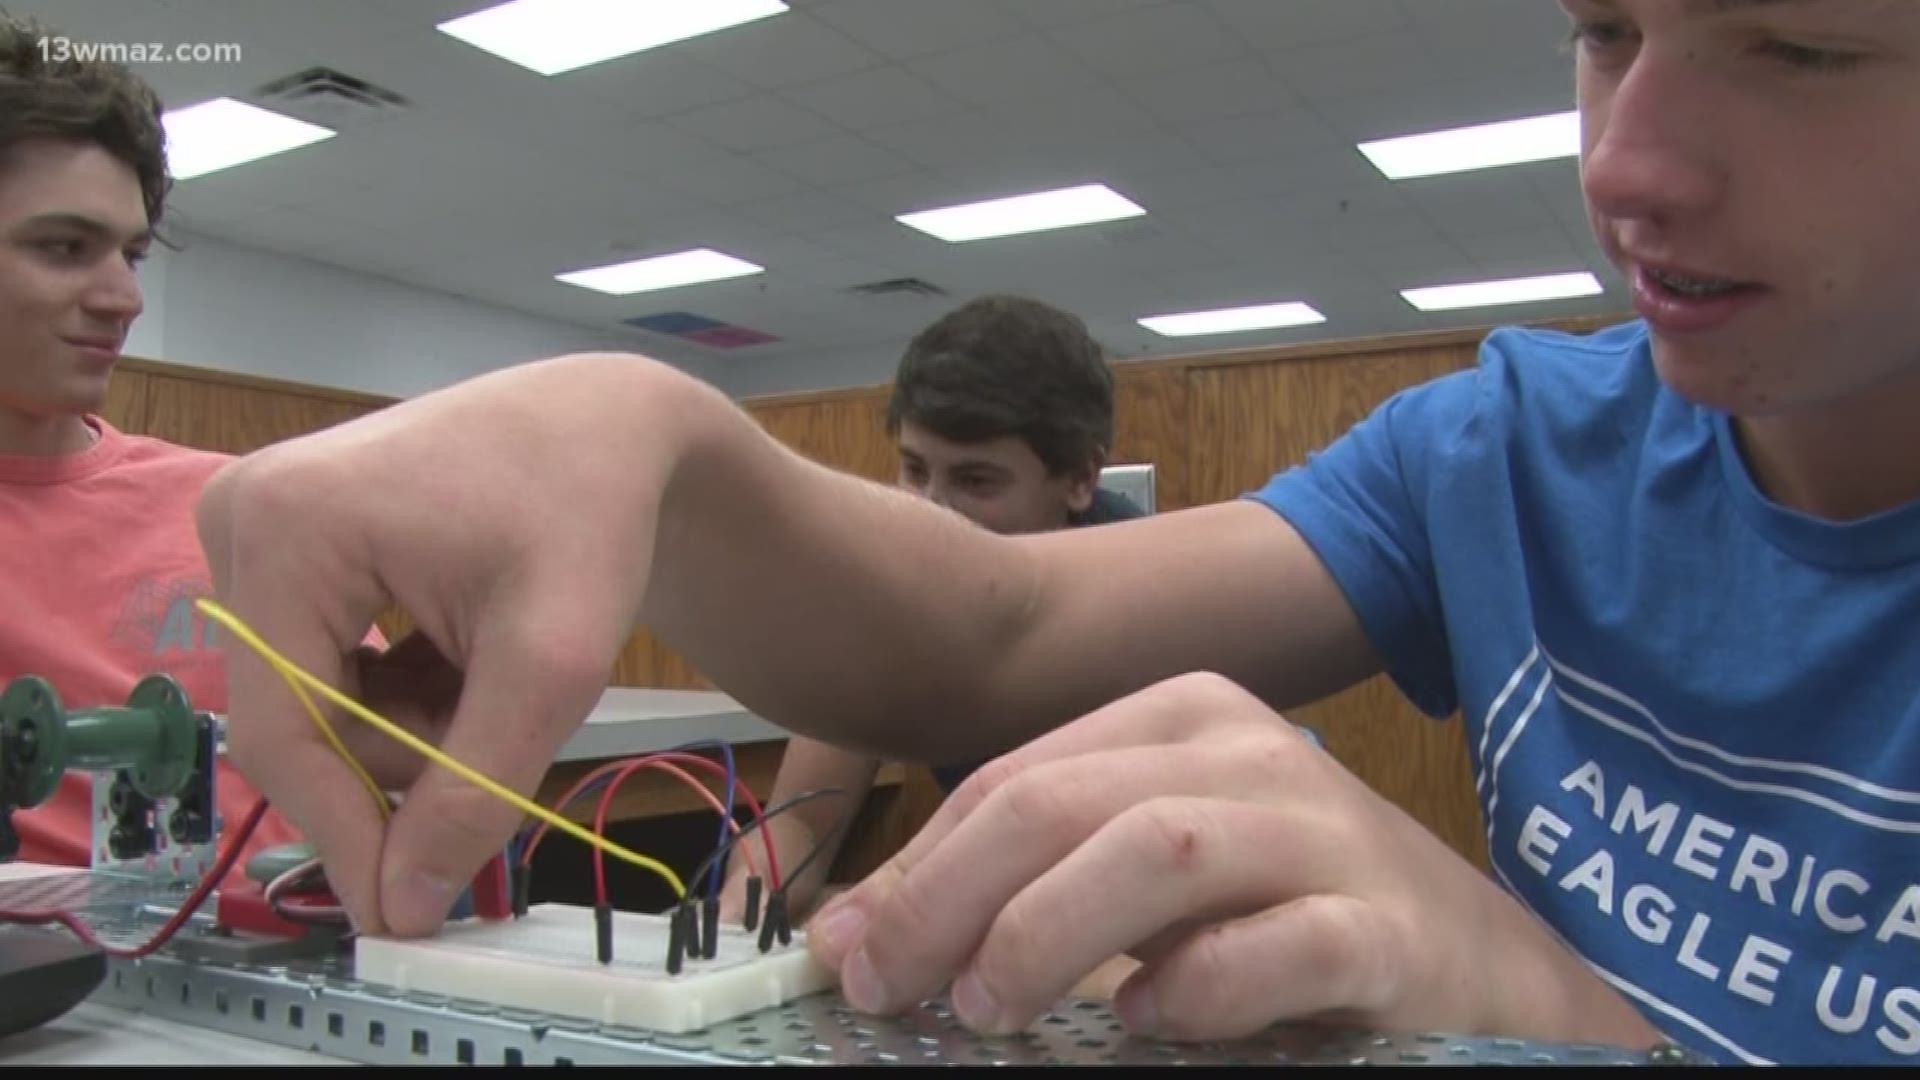 DCHS is the only school in the state to partner with NASA on a program that gives students the opportunity to make food and equipment for astronauts